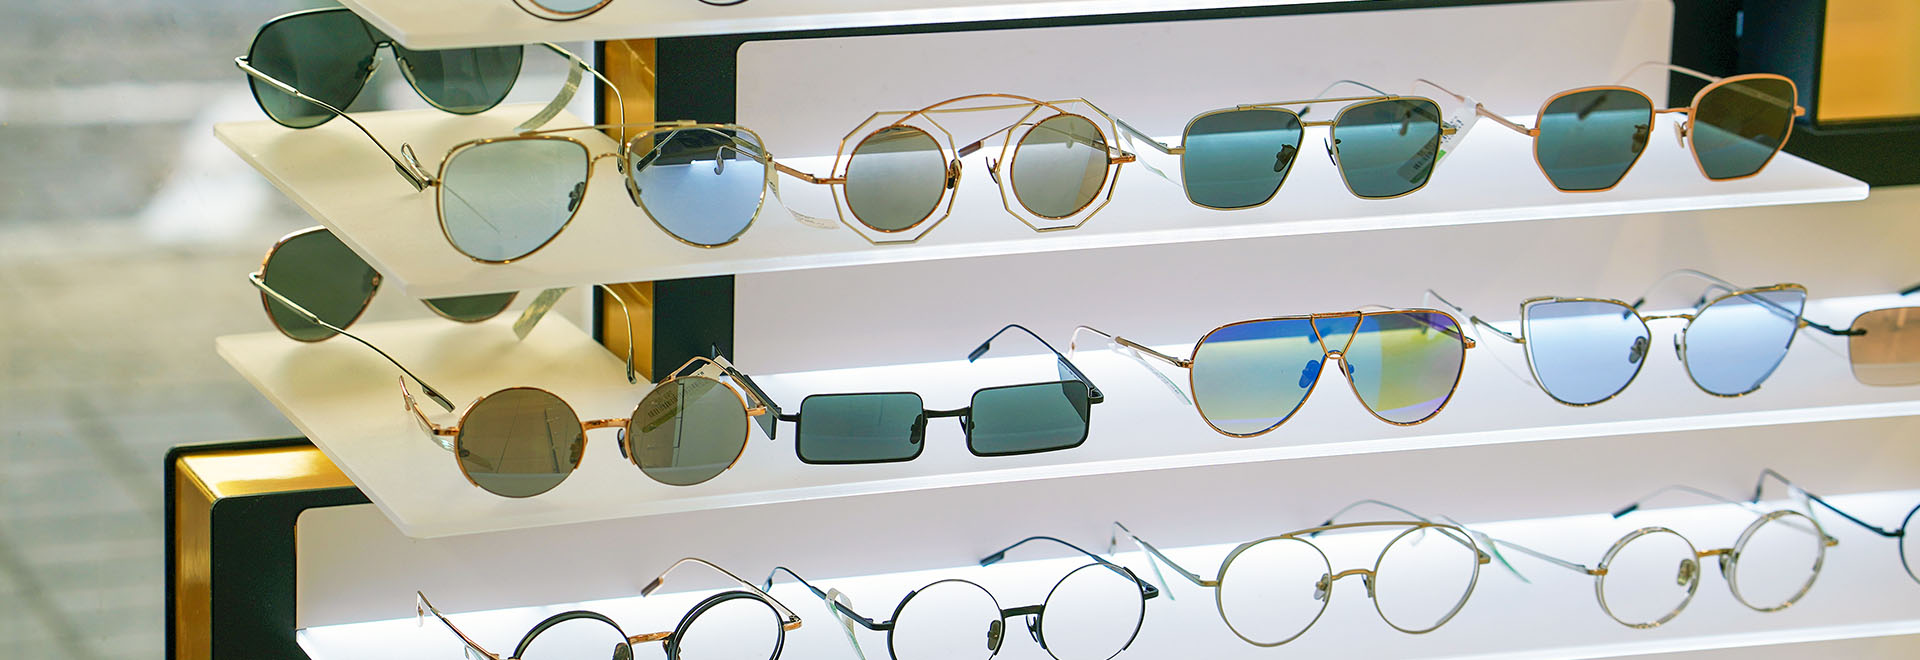 how-to-choose-sunglasses-frames-and-lens-color